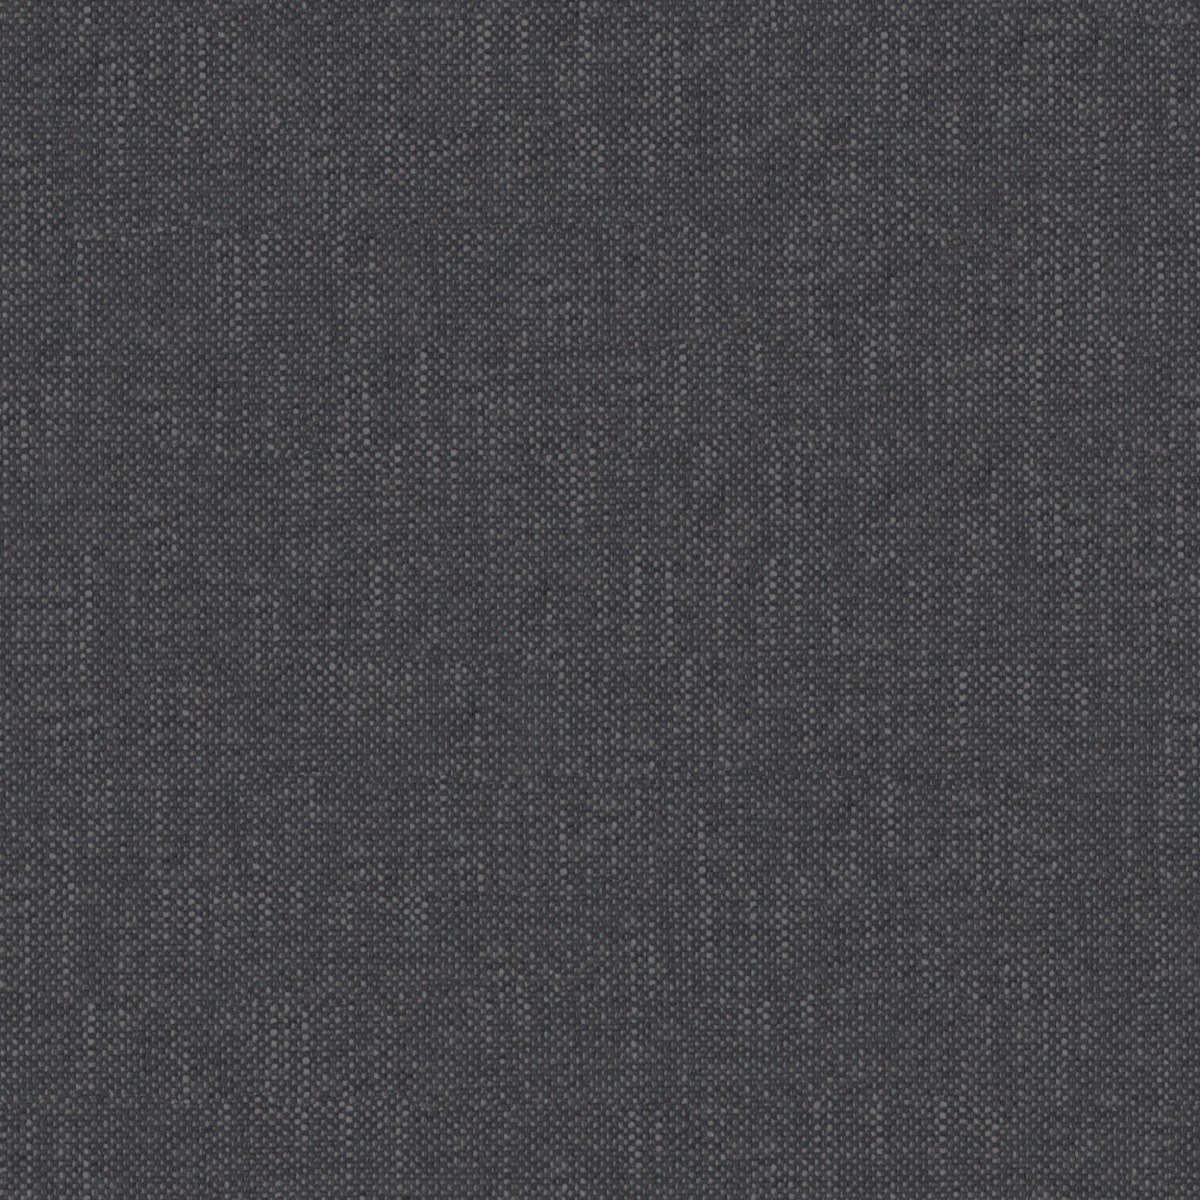 A seamless fabric texture with plain grey chenille units arranged in a None pattern